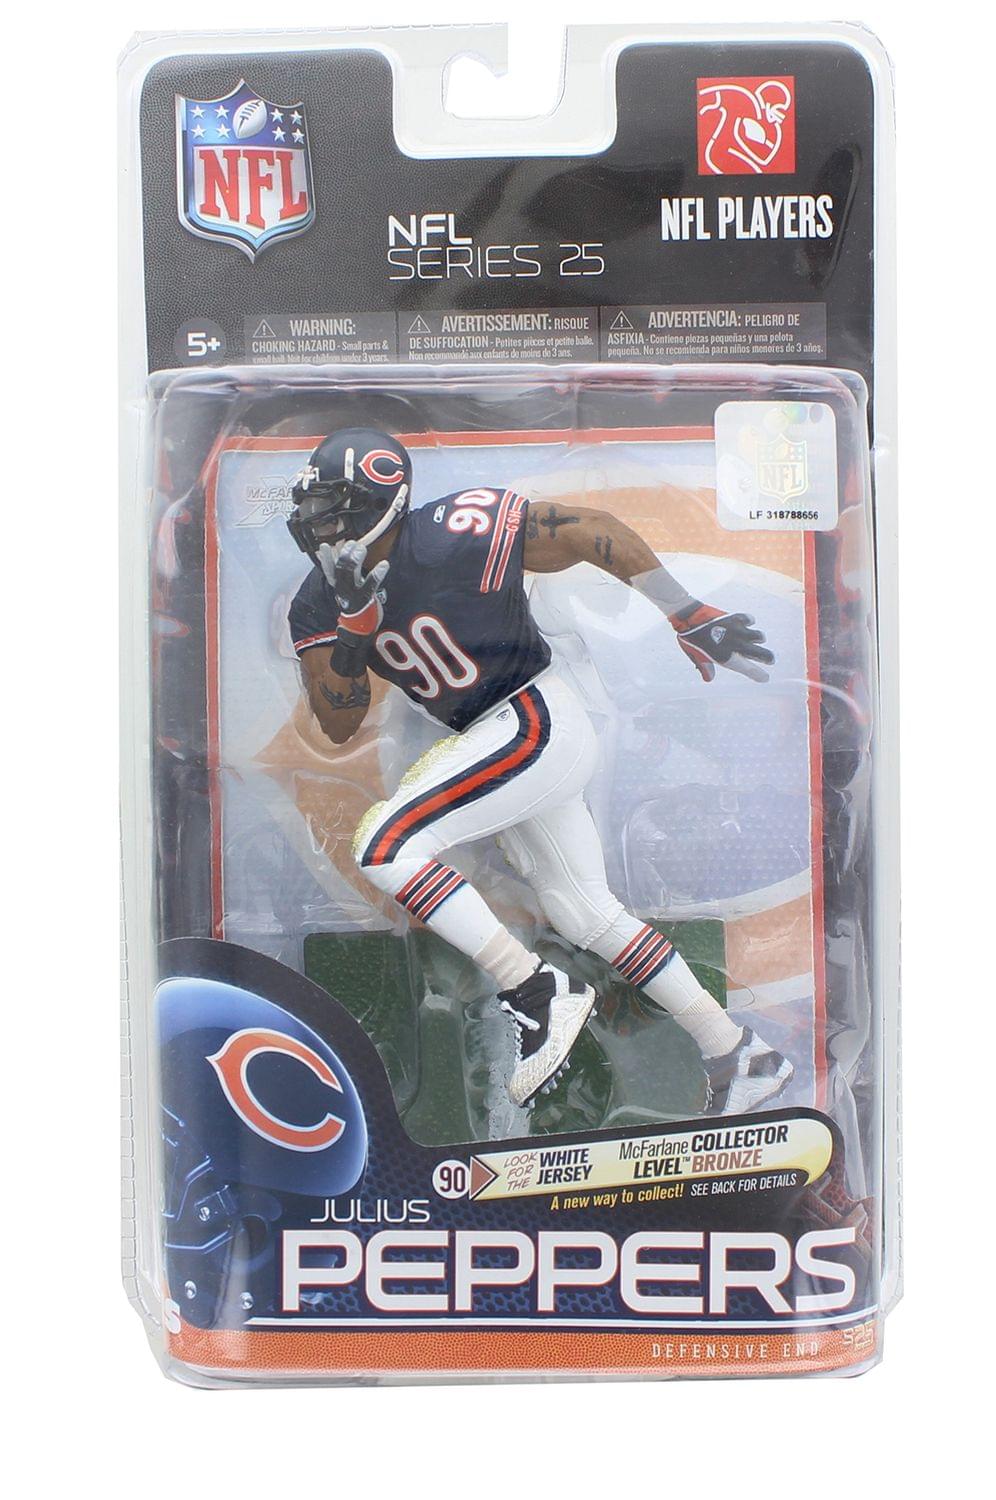 NFL Series 25 Chicago Bears 15cm Action Figure - Julius Peppers